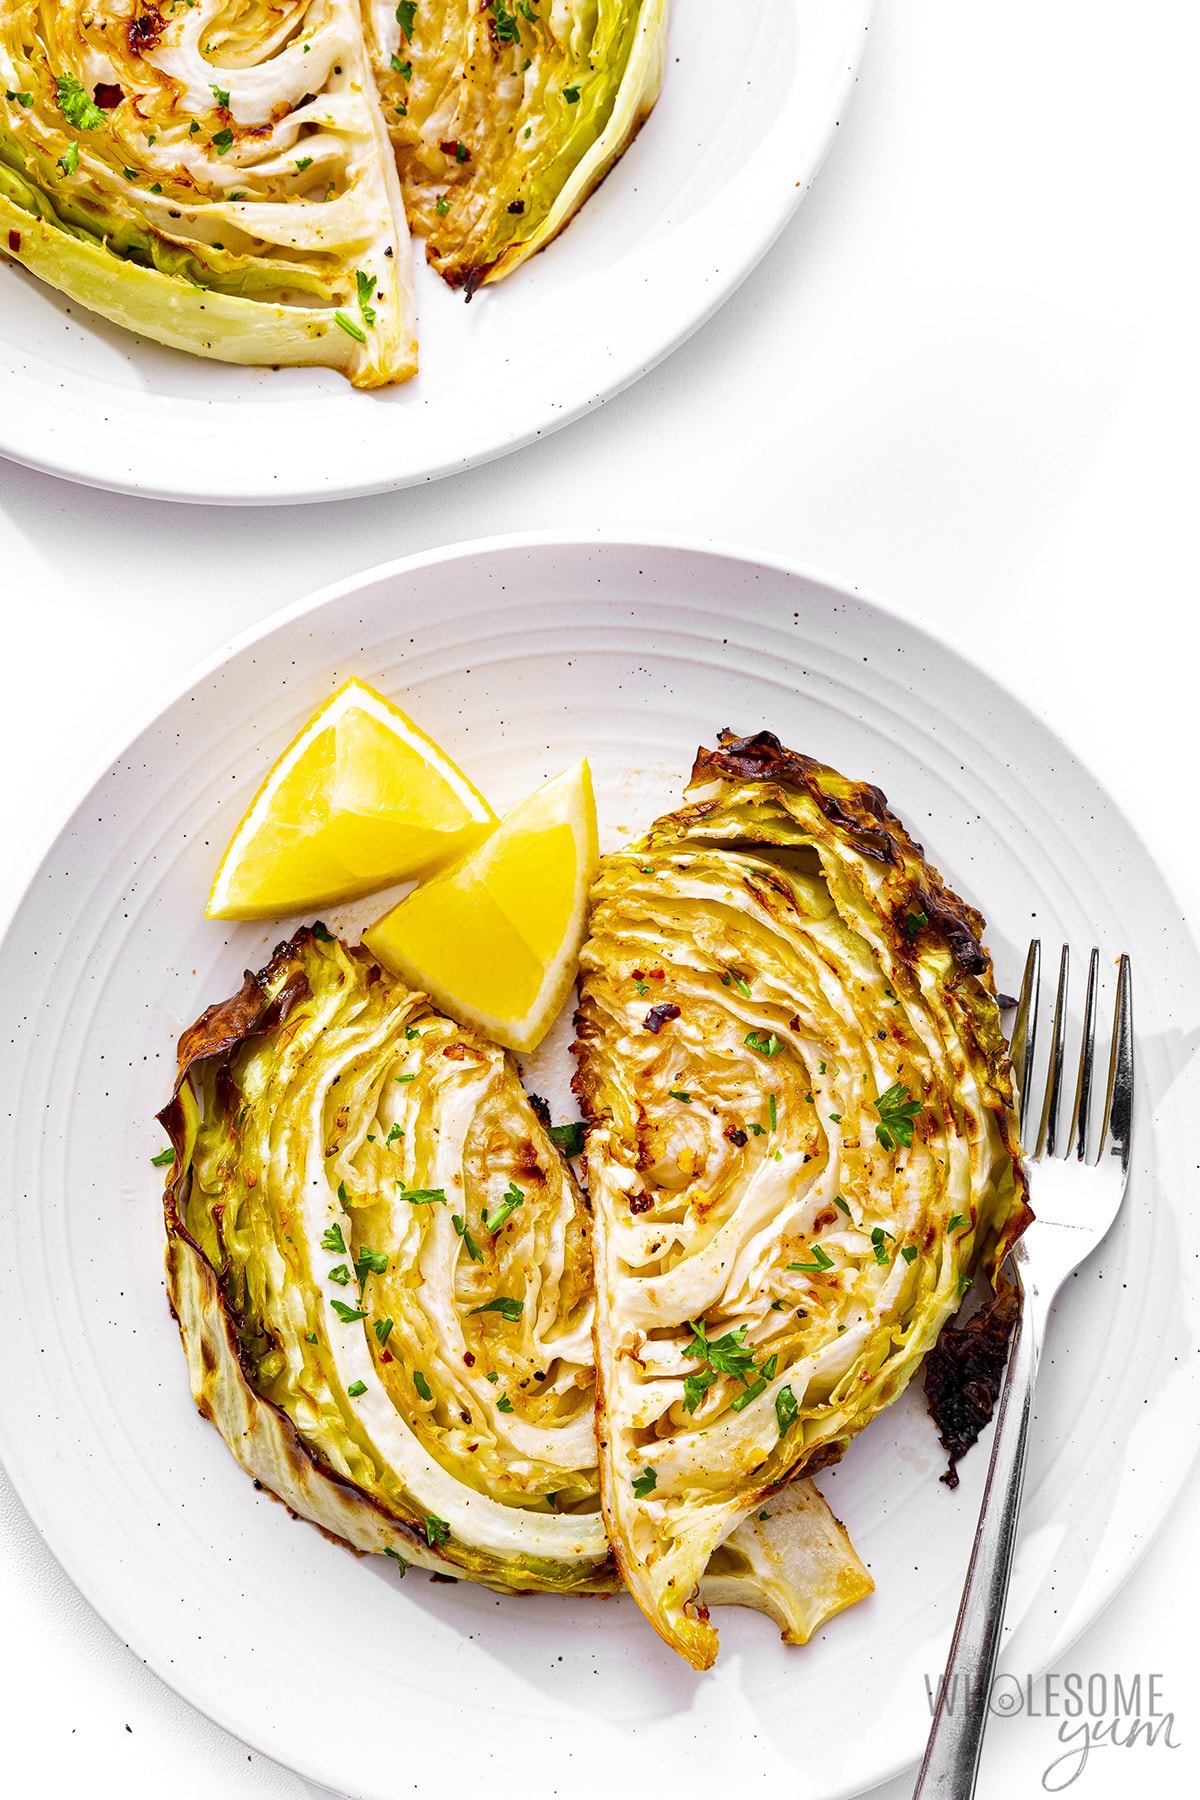 Roasted cabbage on a plate with a fork and lemon wedges.